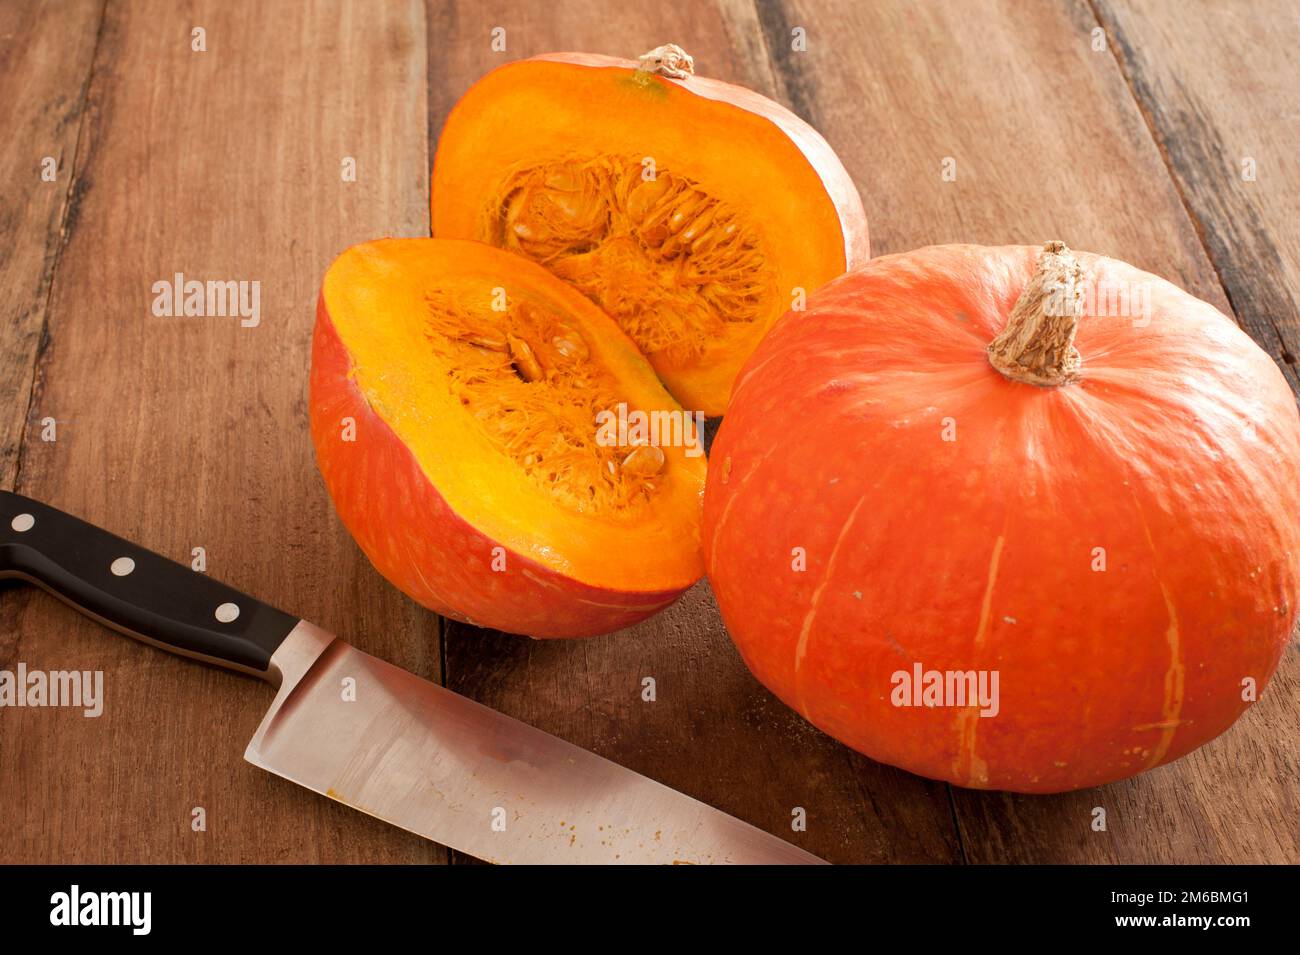 Small round oddly shaped pumpkin cut in middle Stock Photo